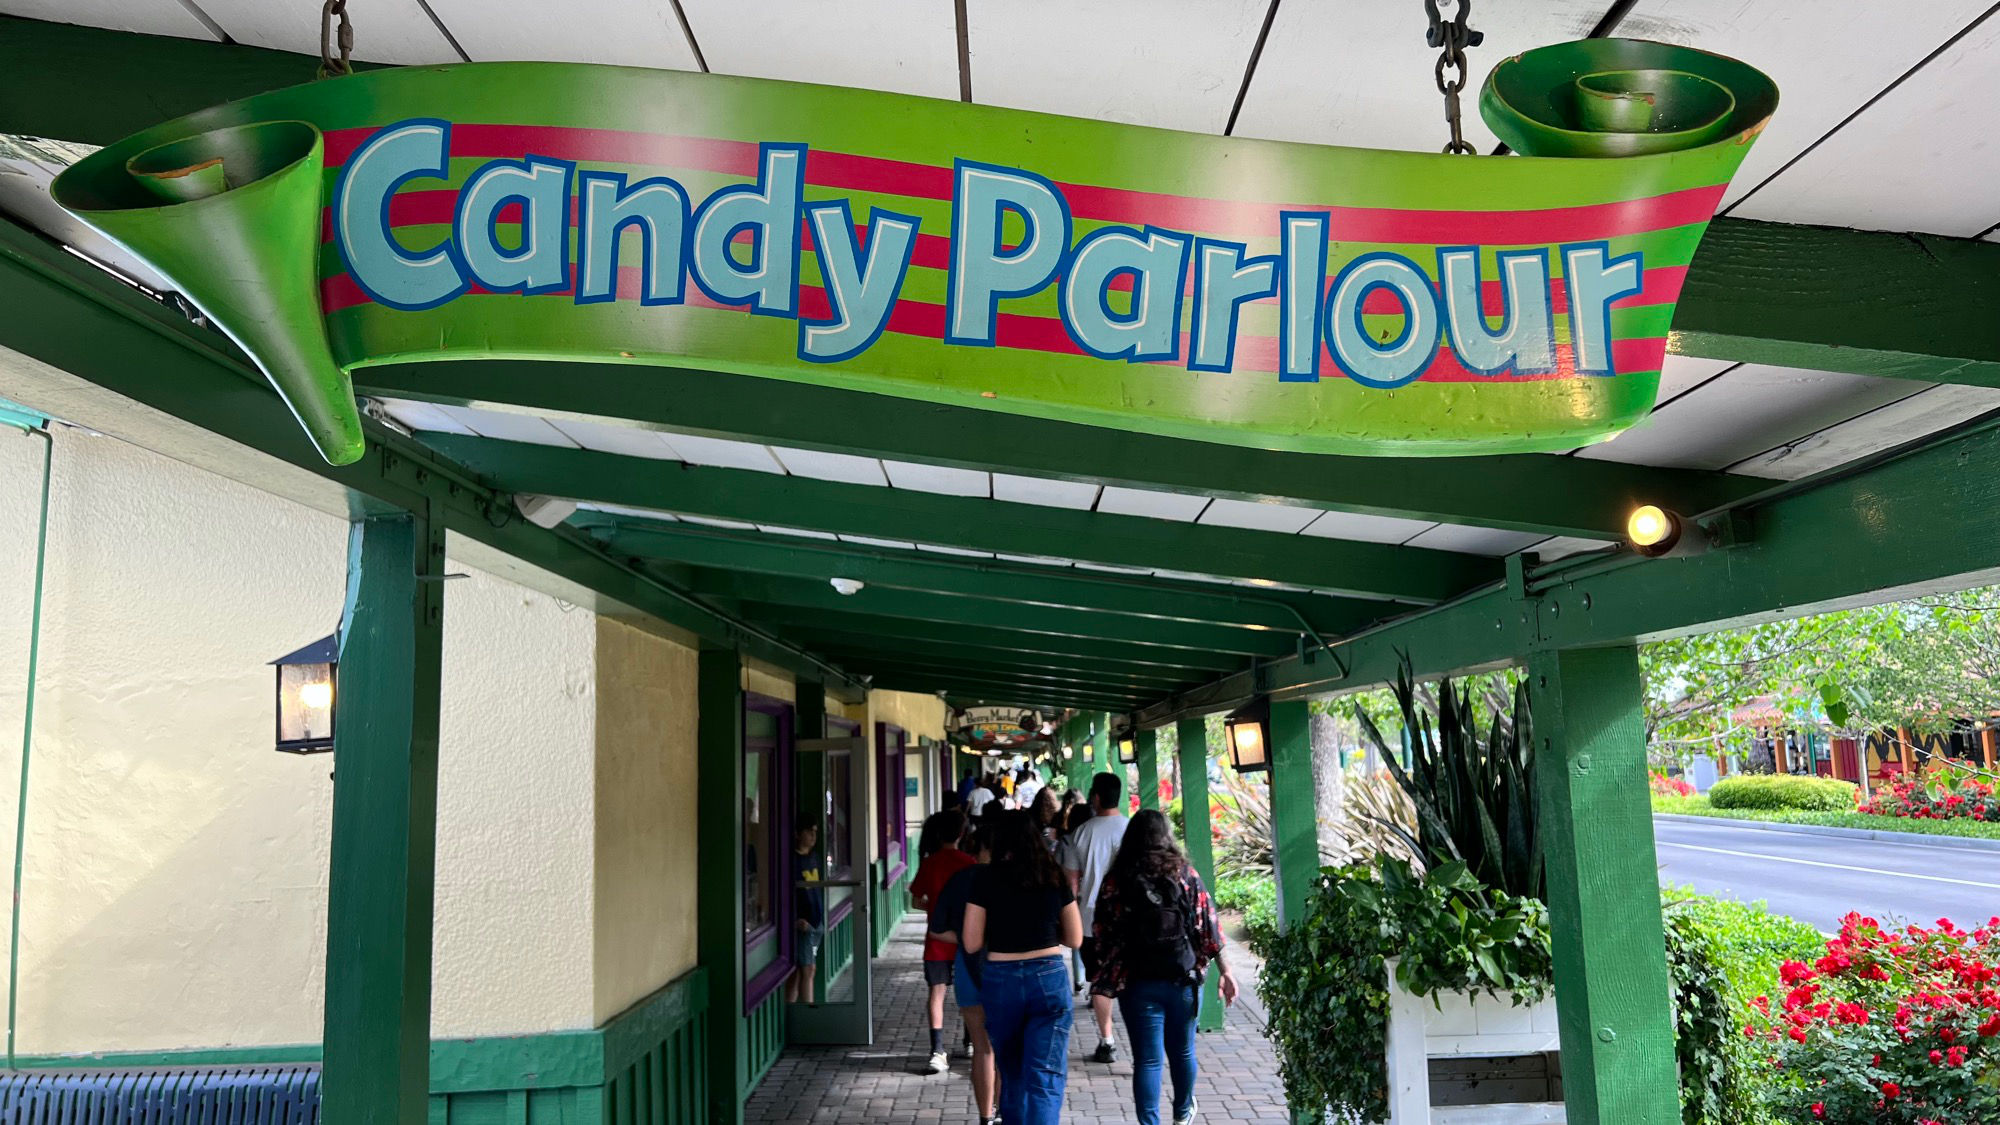 Candy Parlour Sign